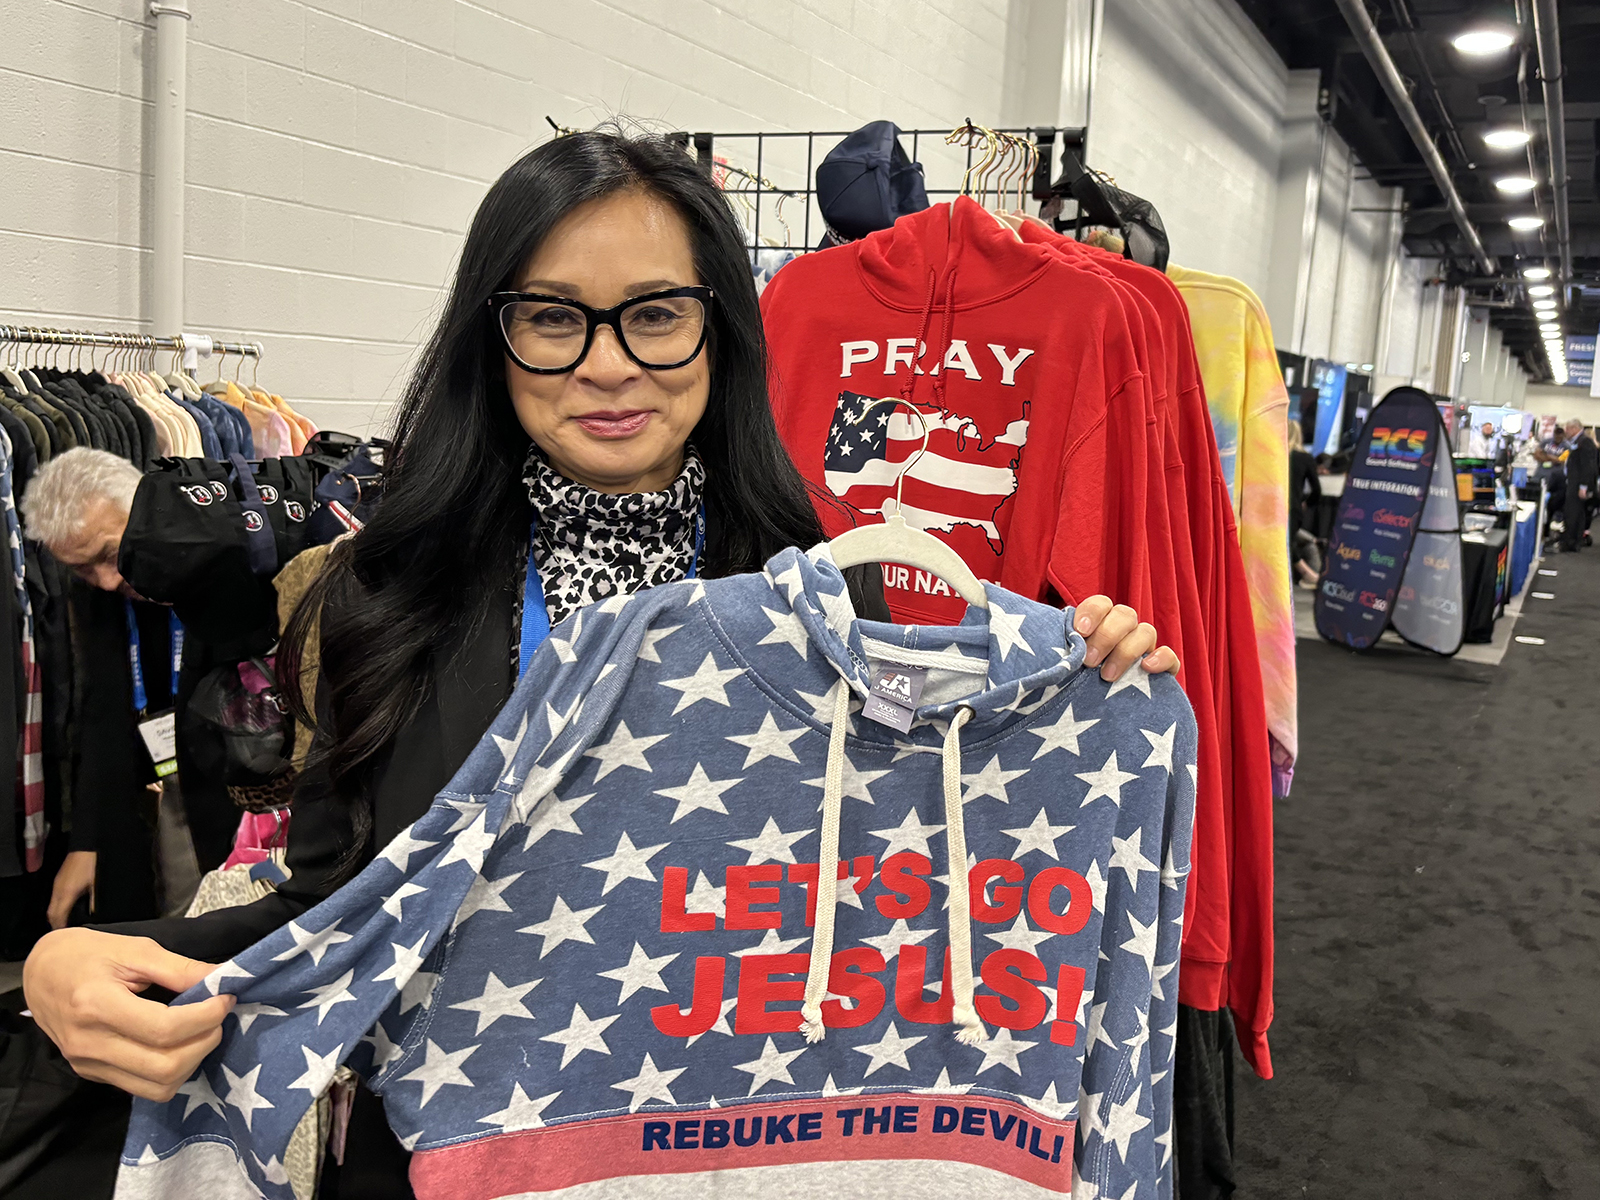 Analia Anderson displays some of her "Let's Go Jesus" merchandise in the exhibition hall of the annual gathering of National Religious Broadcasters in Nasvhille, Tenn. (RNS photo/Bob Smietana)